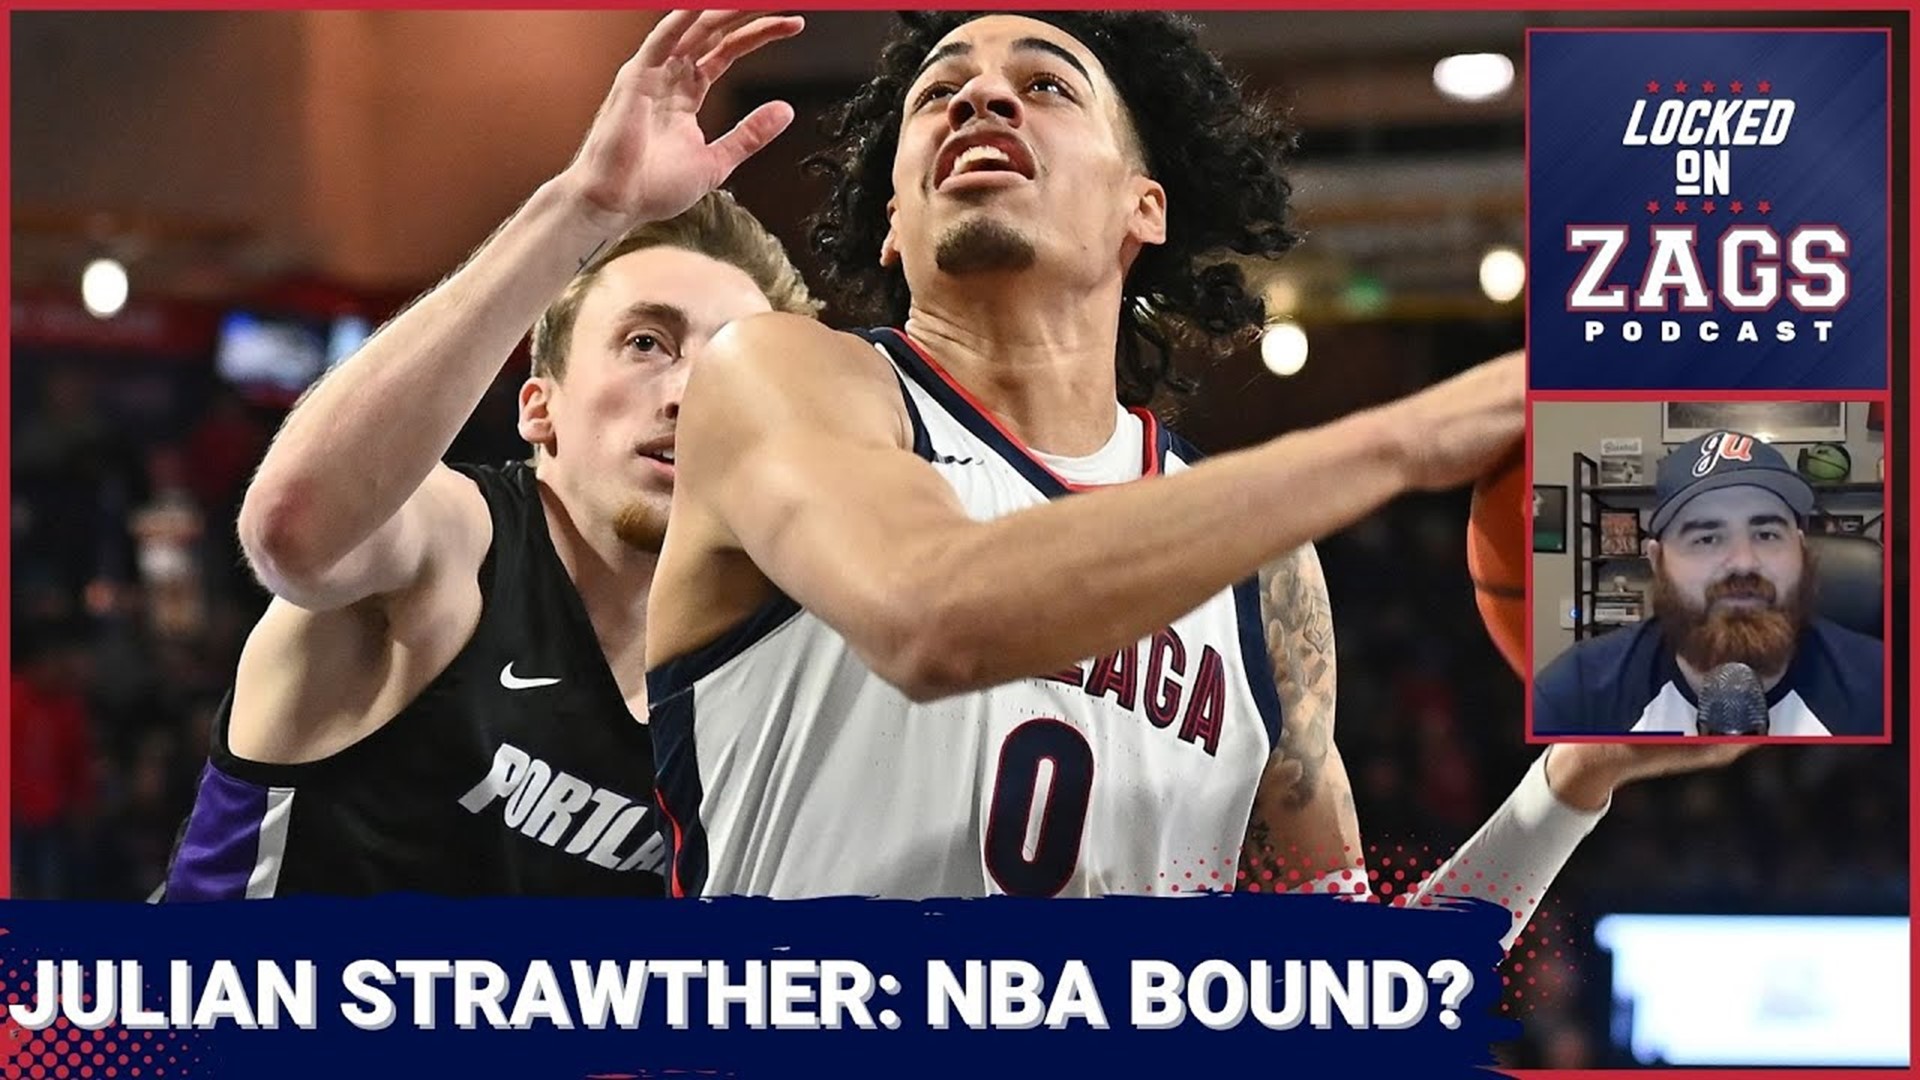 We break down the NBA draft profiles for Julian Strawther and Drew Timme, discussing the pros and cons, and the likelihood they stay in Spokane another year.